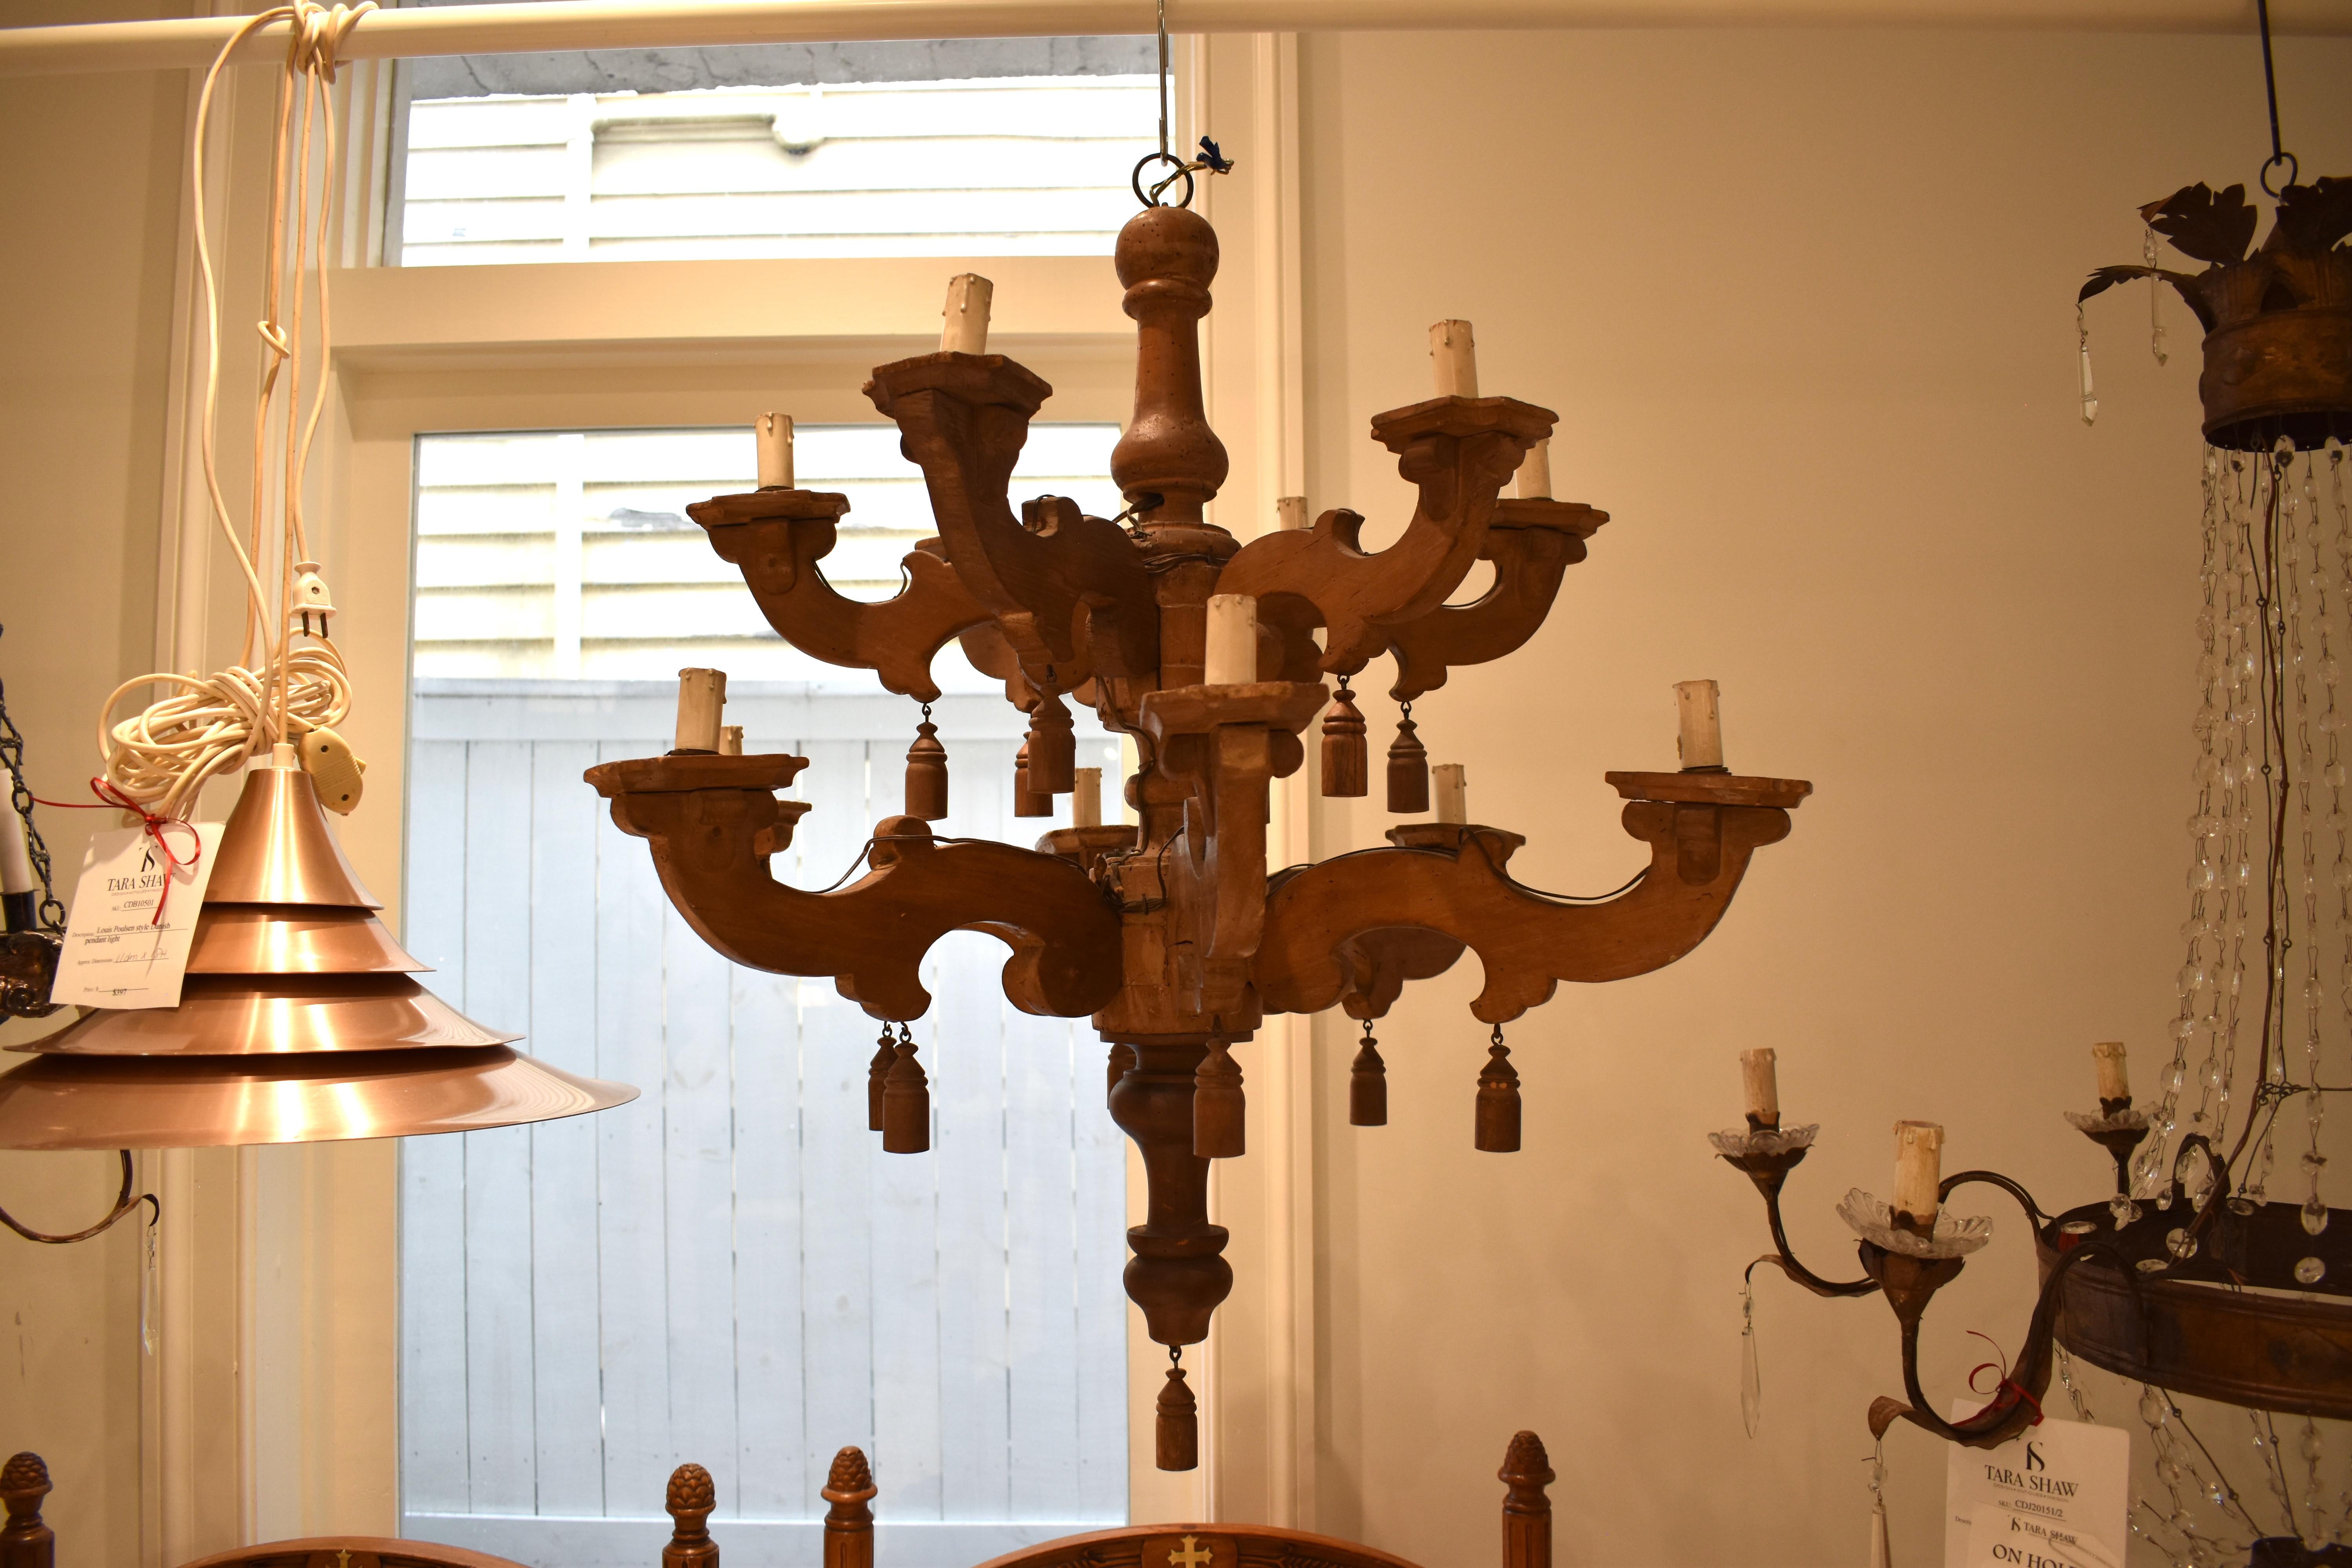 This is a most unusual all wood chandelier with 12 arms. Wooden tassels add to the whimsey. The arms are in a two tiered arrangement and carefully trimmed with small corbels around each candle. Needs to be rewired for US use. 